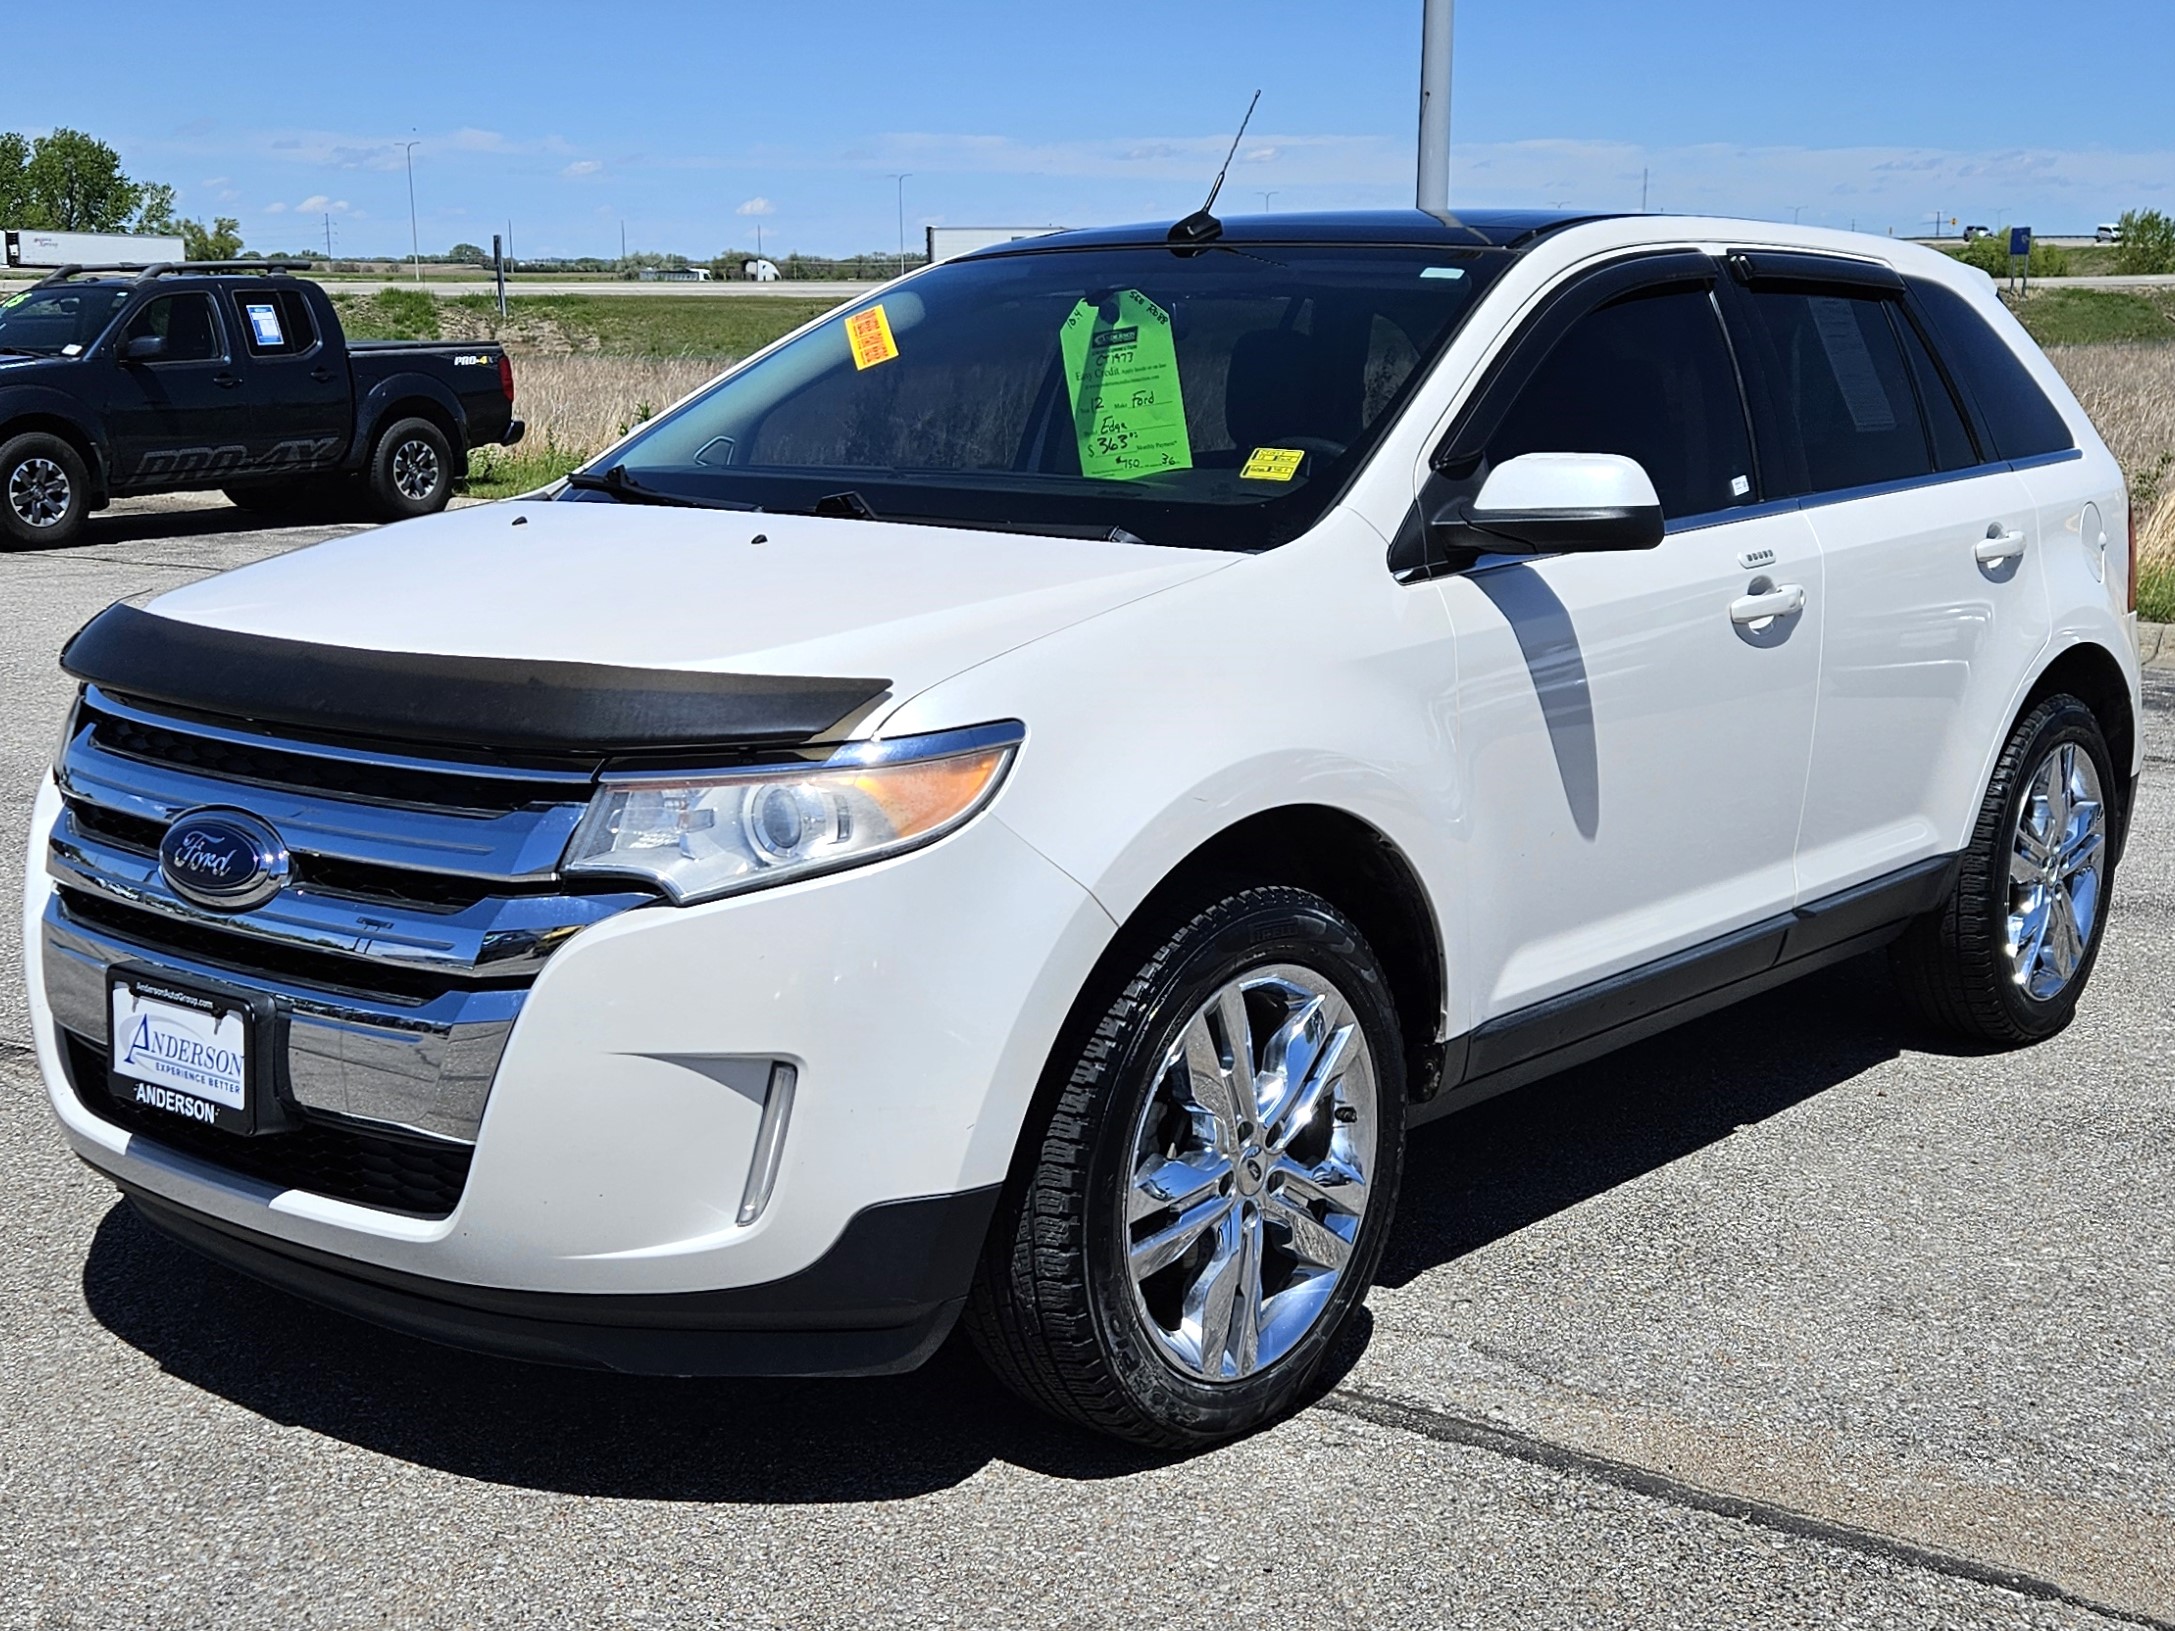 Used 2012 Ford Edge Limited SUV for sale in 